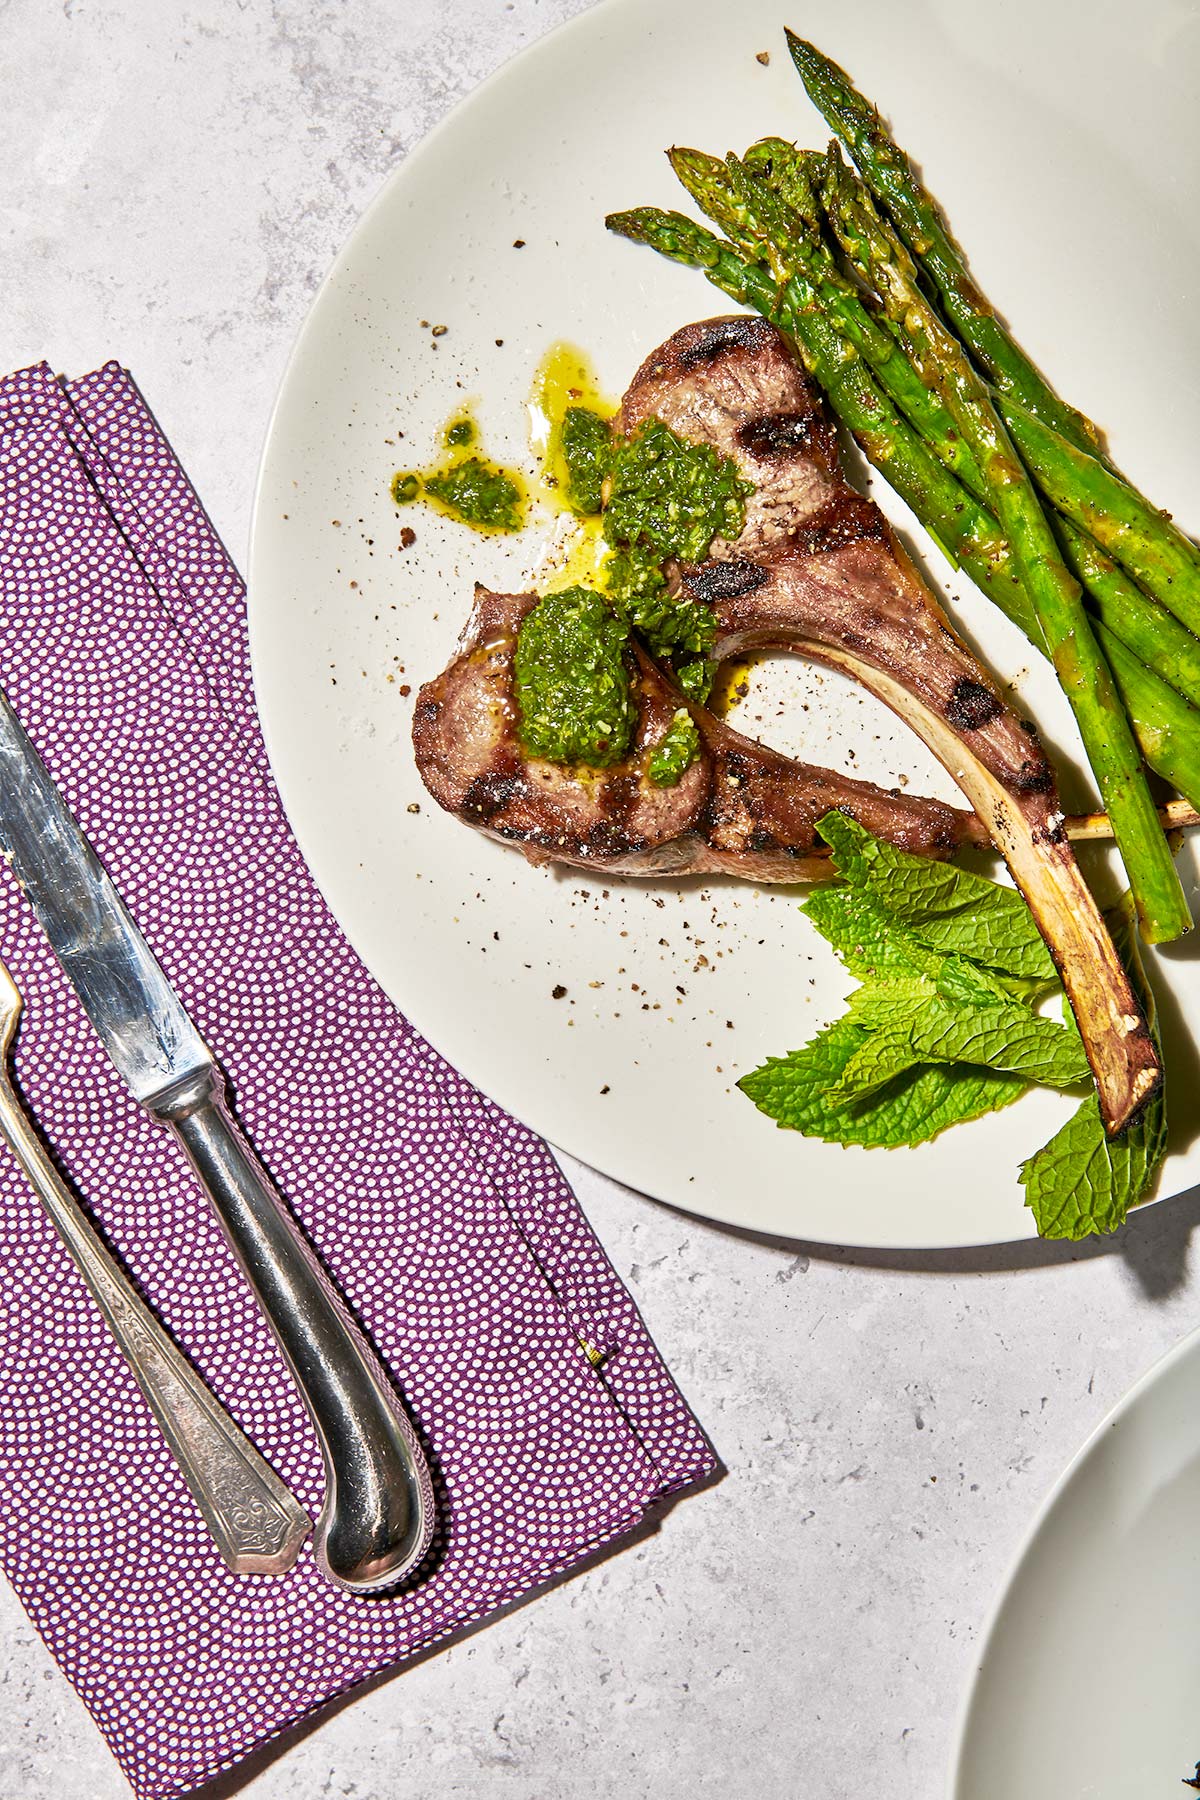 Picnic table with plated grilled rib lamb chops and asparagus next to purple napkin.